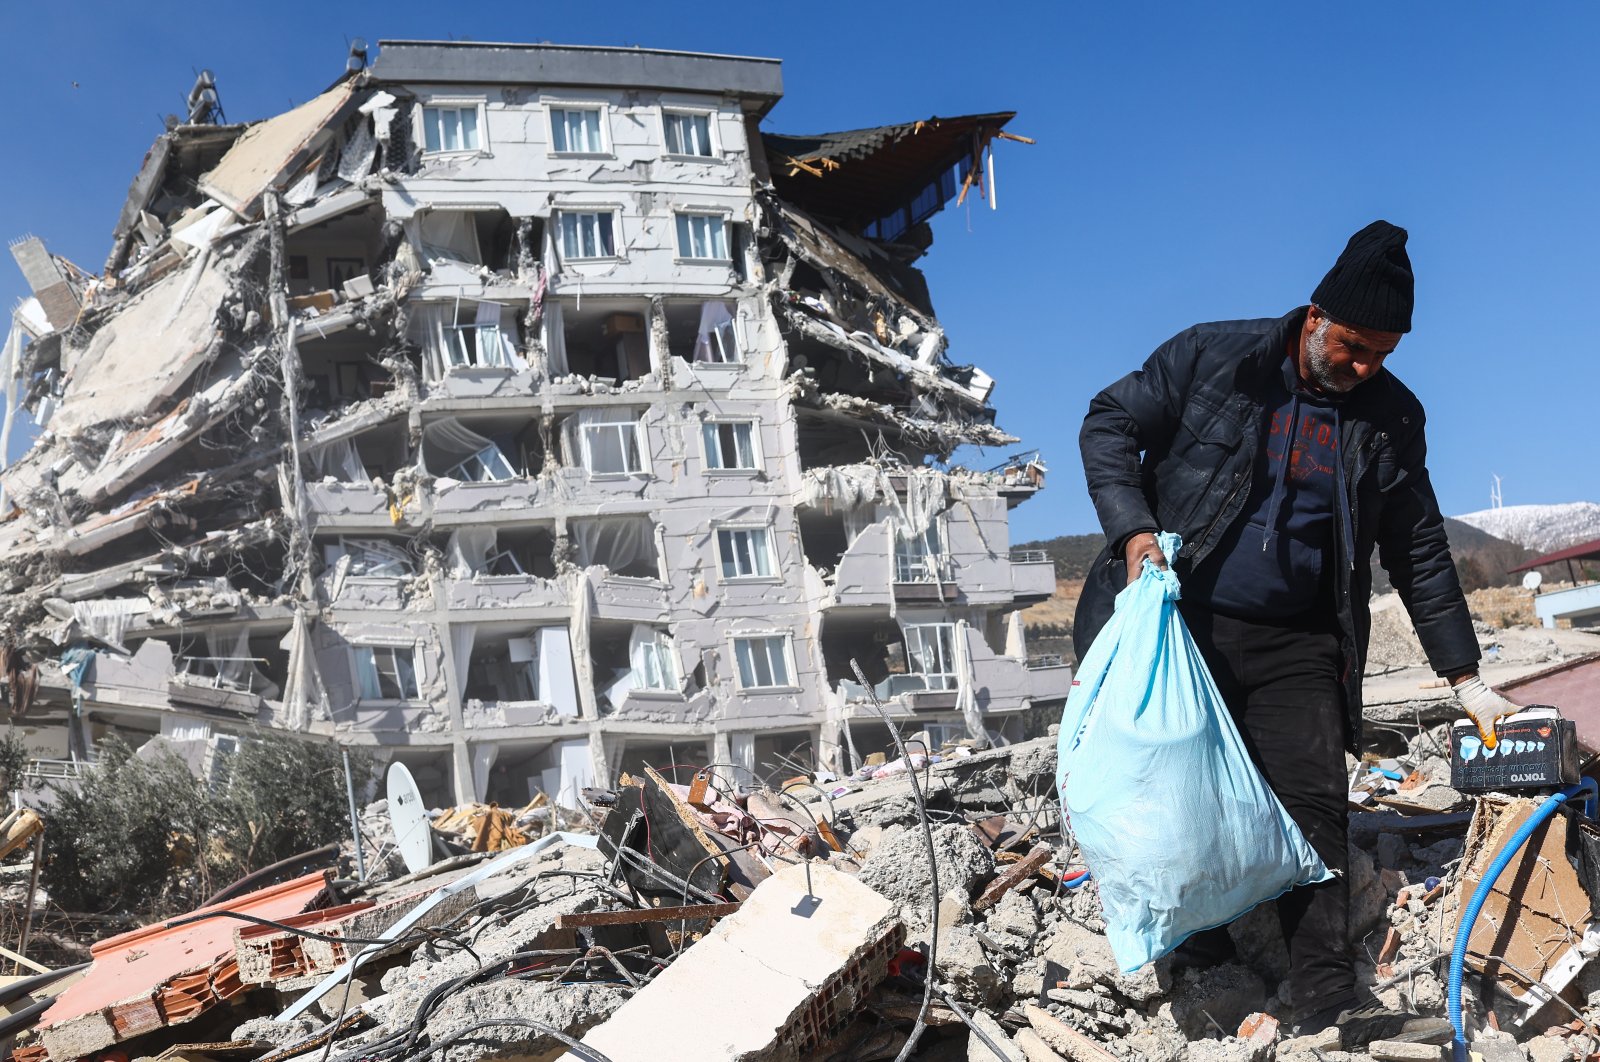 A man tries to salvage some belongings from the rubble at the site of collapsed buildings following a powerful earthquake, in the Nurdağı district of Gaziantep, southeastern Türkiye, Feb. 13, 2023. (EPA Photo)